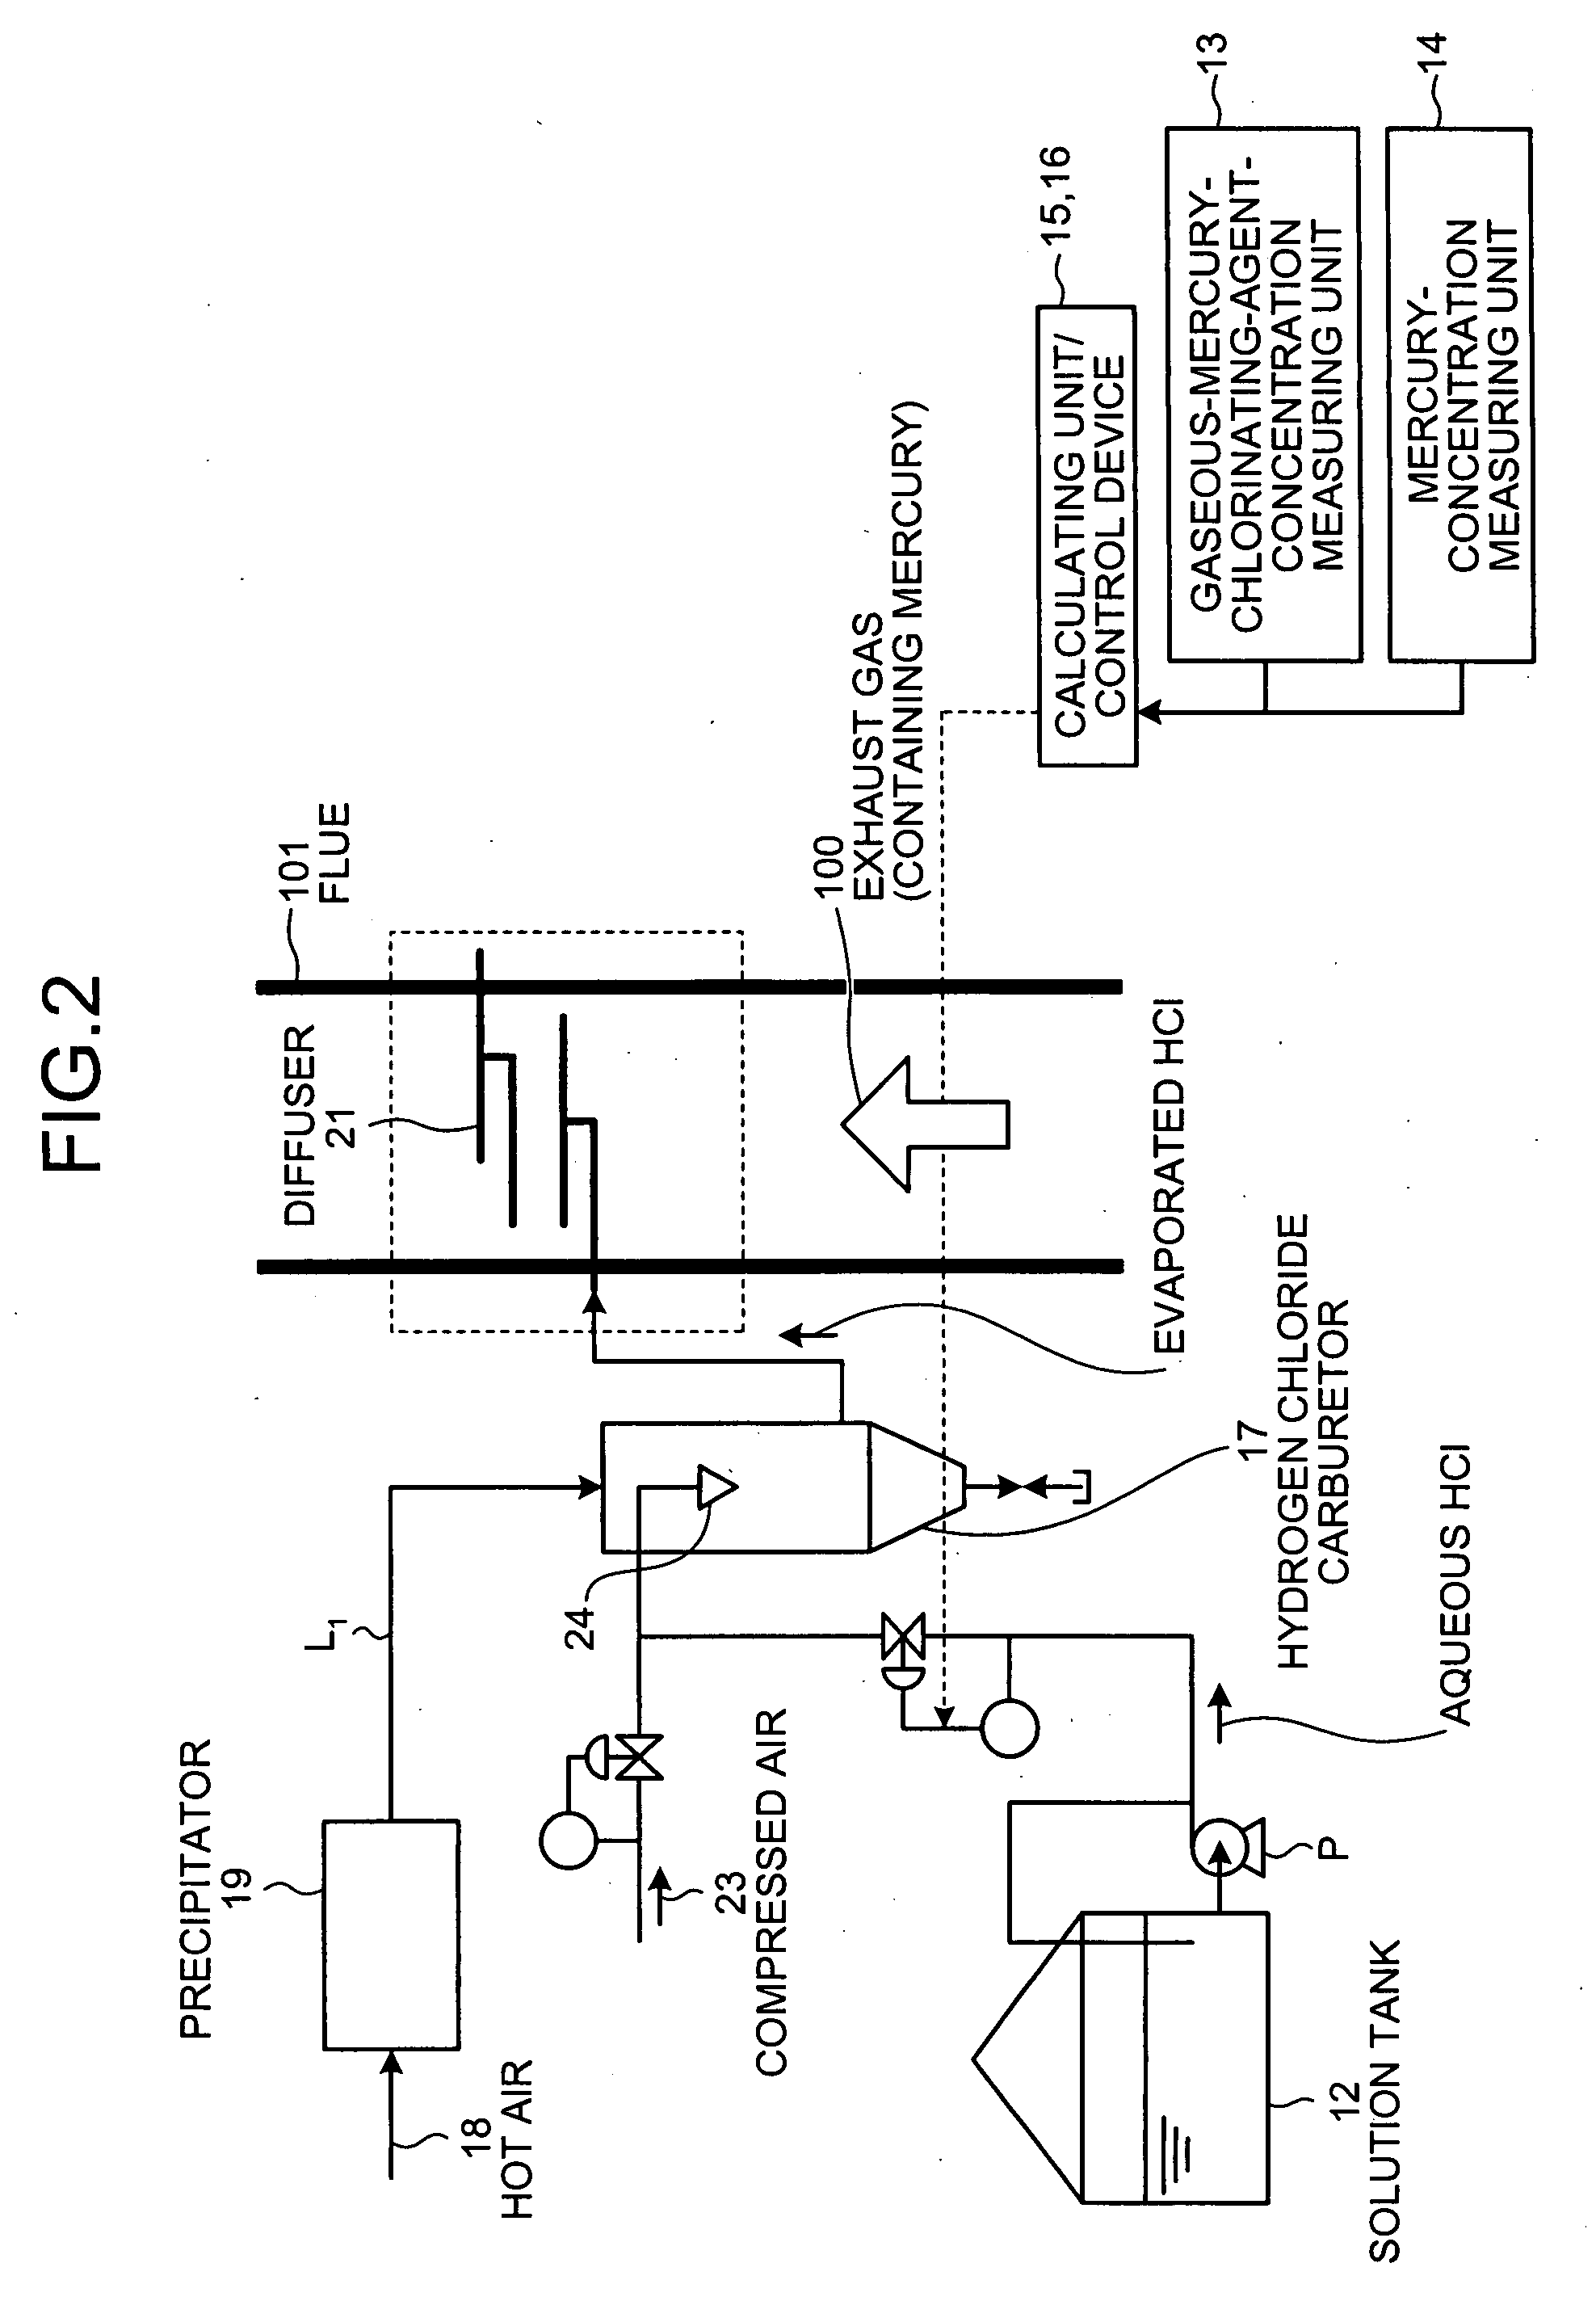 Method and device for removing mercury